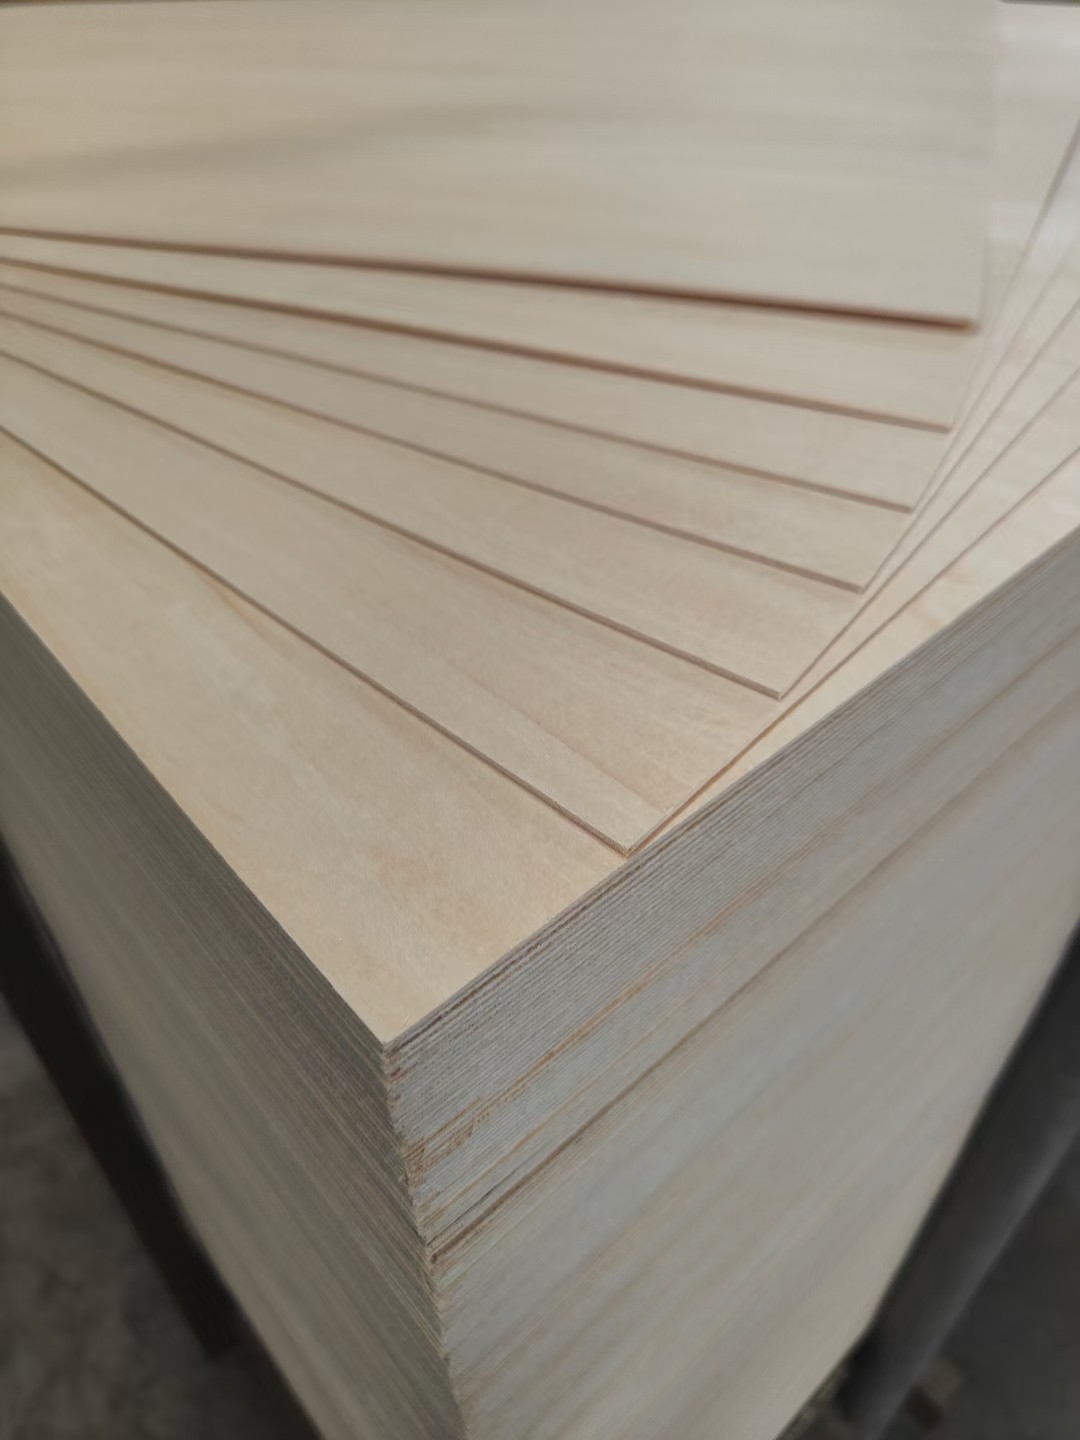  Basswood Plywood for Laser Cutting Toys Art Craft